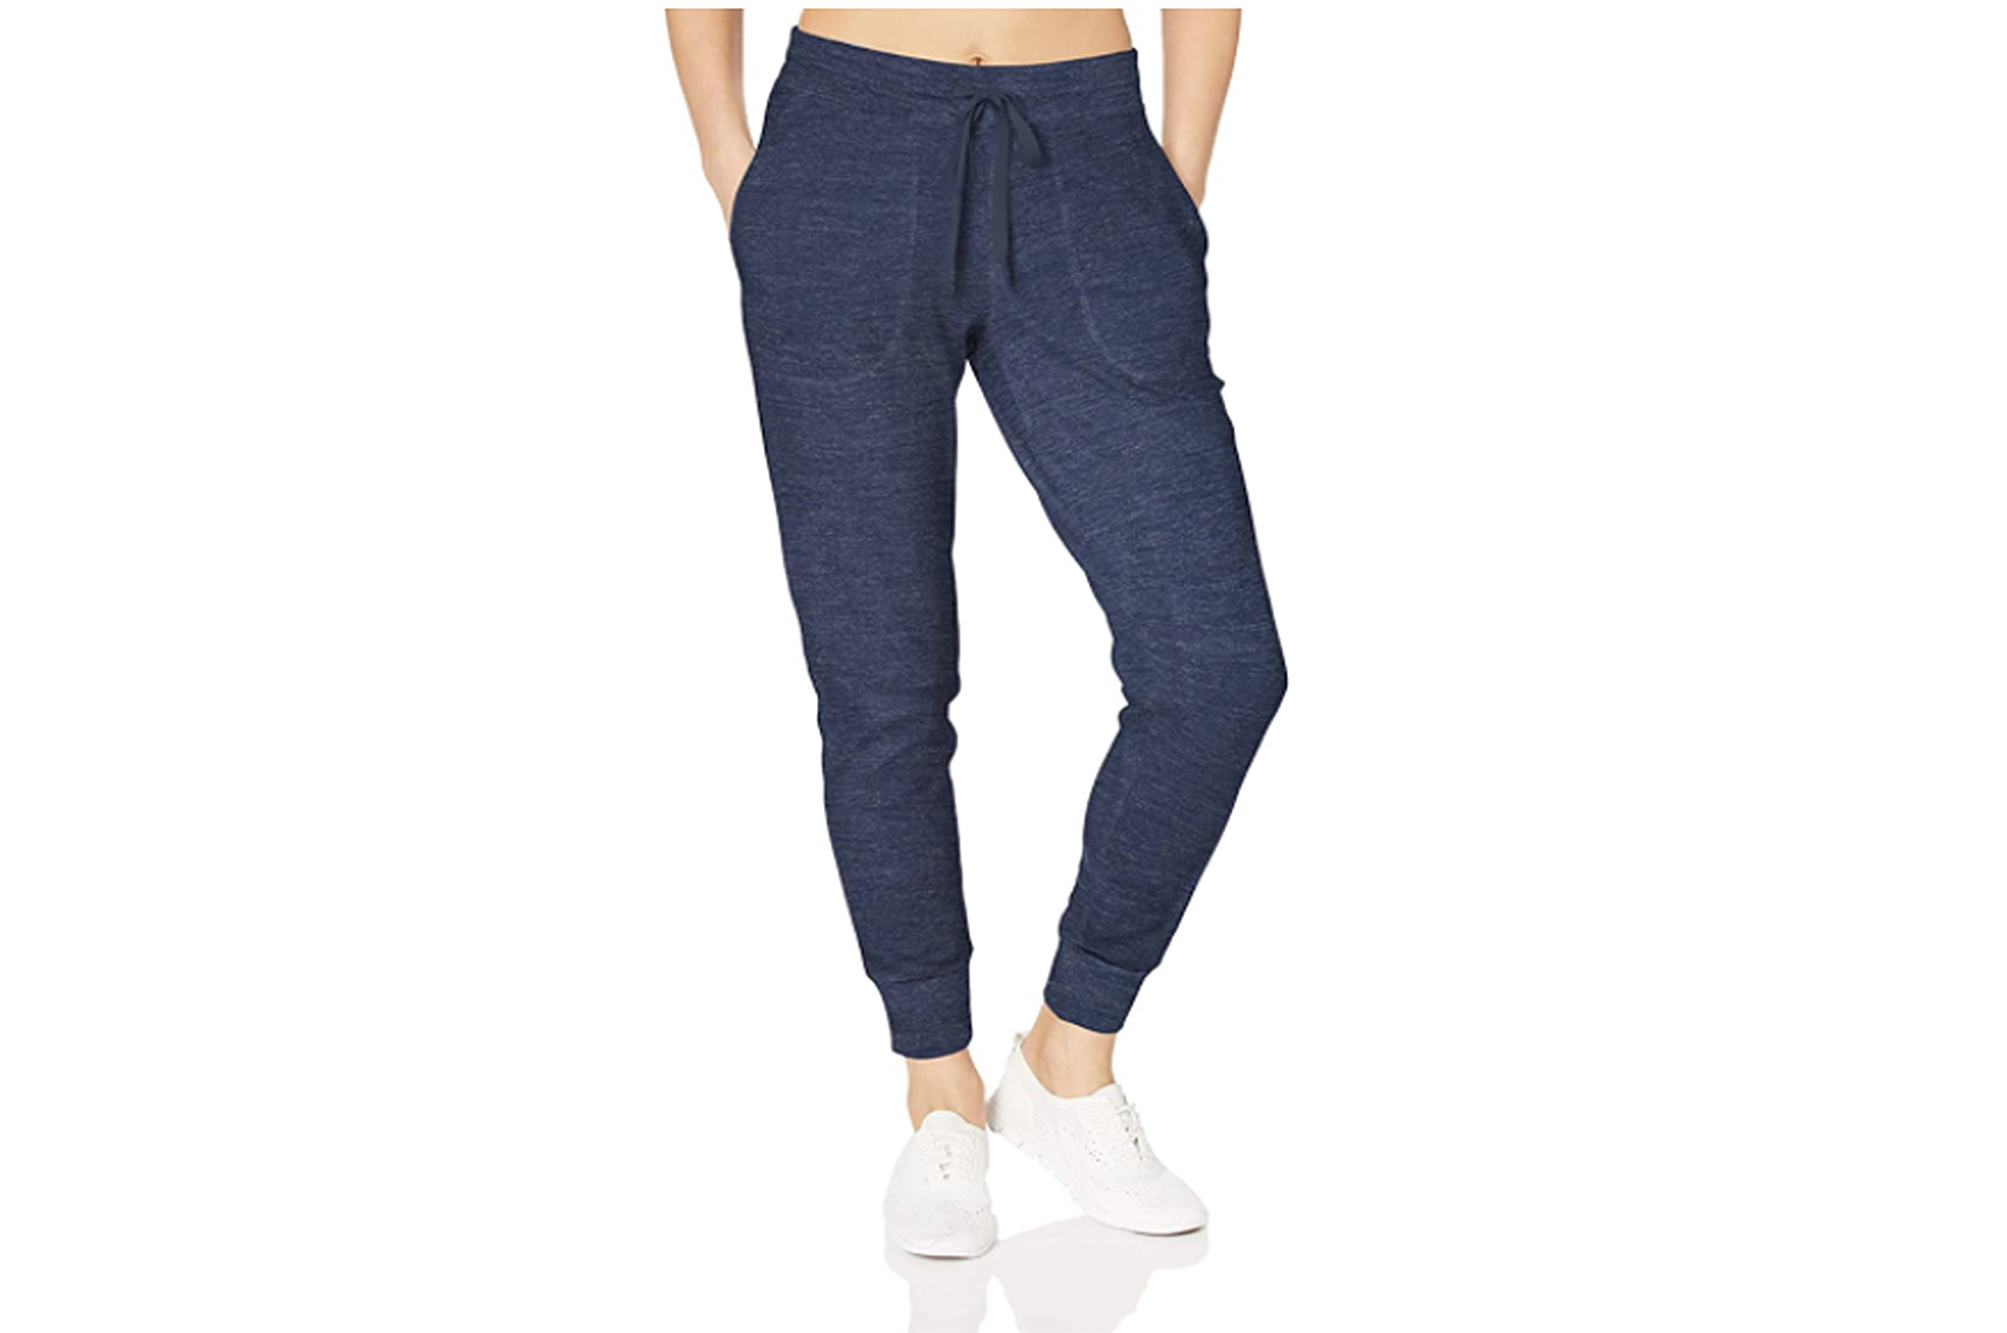 Amazon Essentials Joggers Are the Perfect Work-From-Home Pants